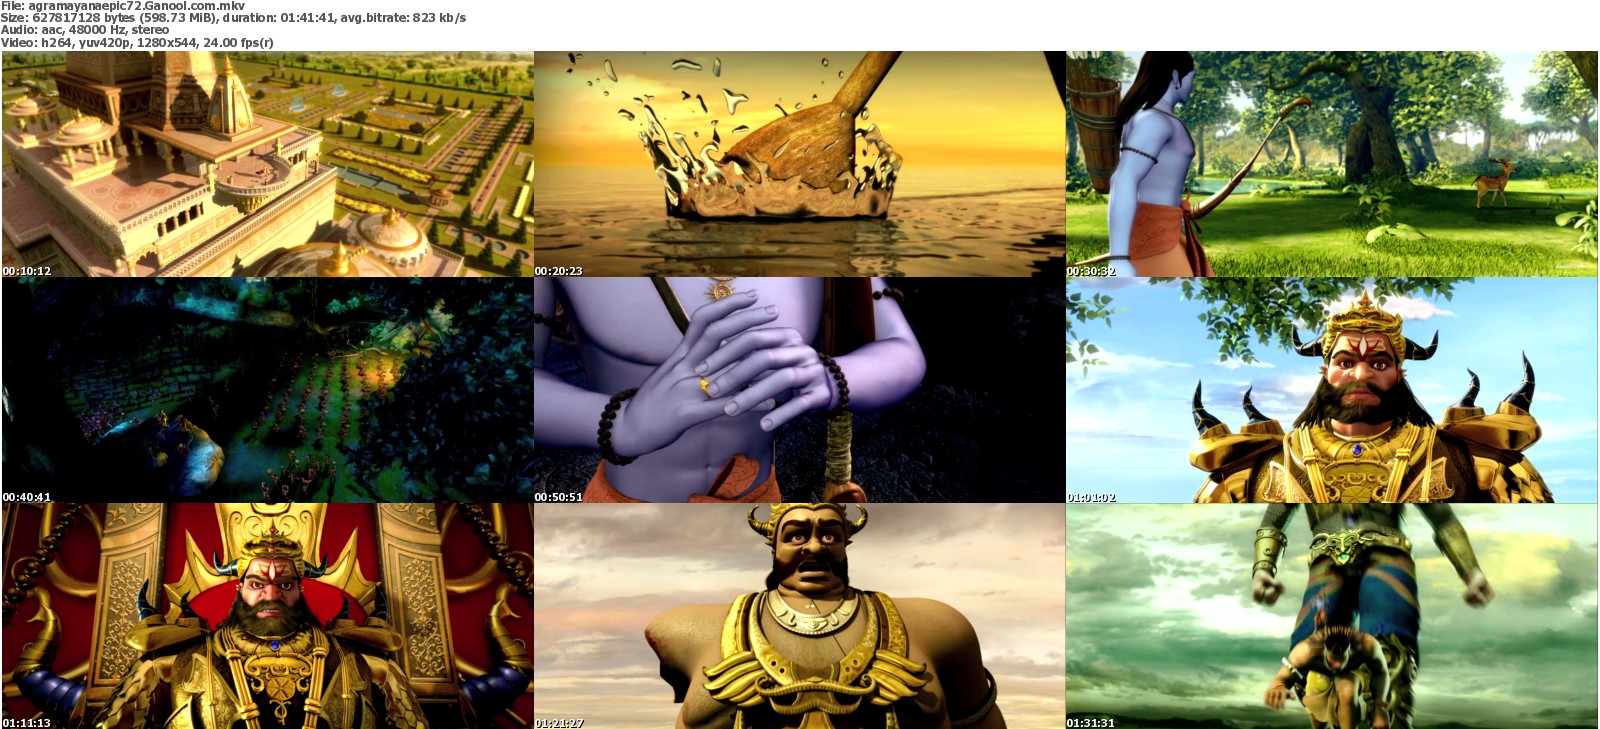 The Ramayana - The Epic 2 Full Movie Subtitle Indonesia Download